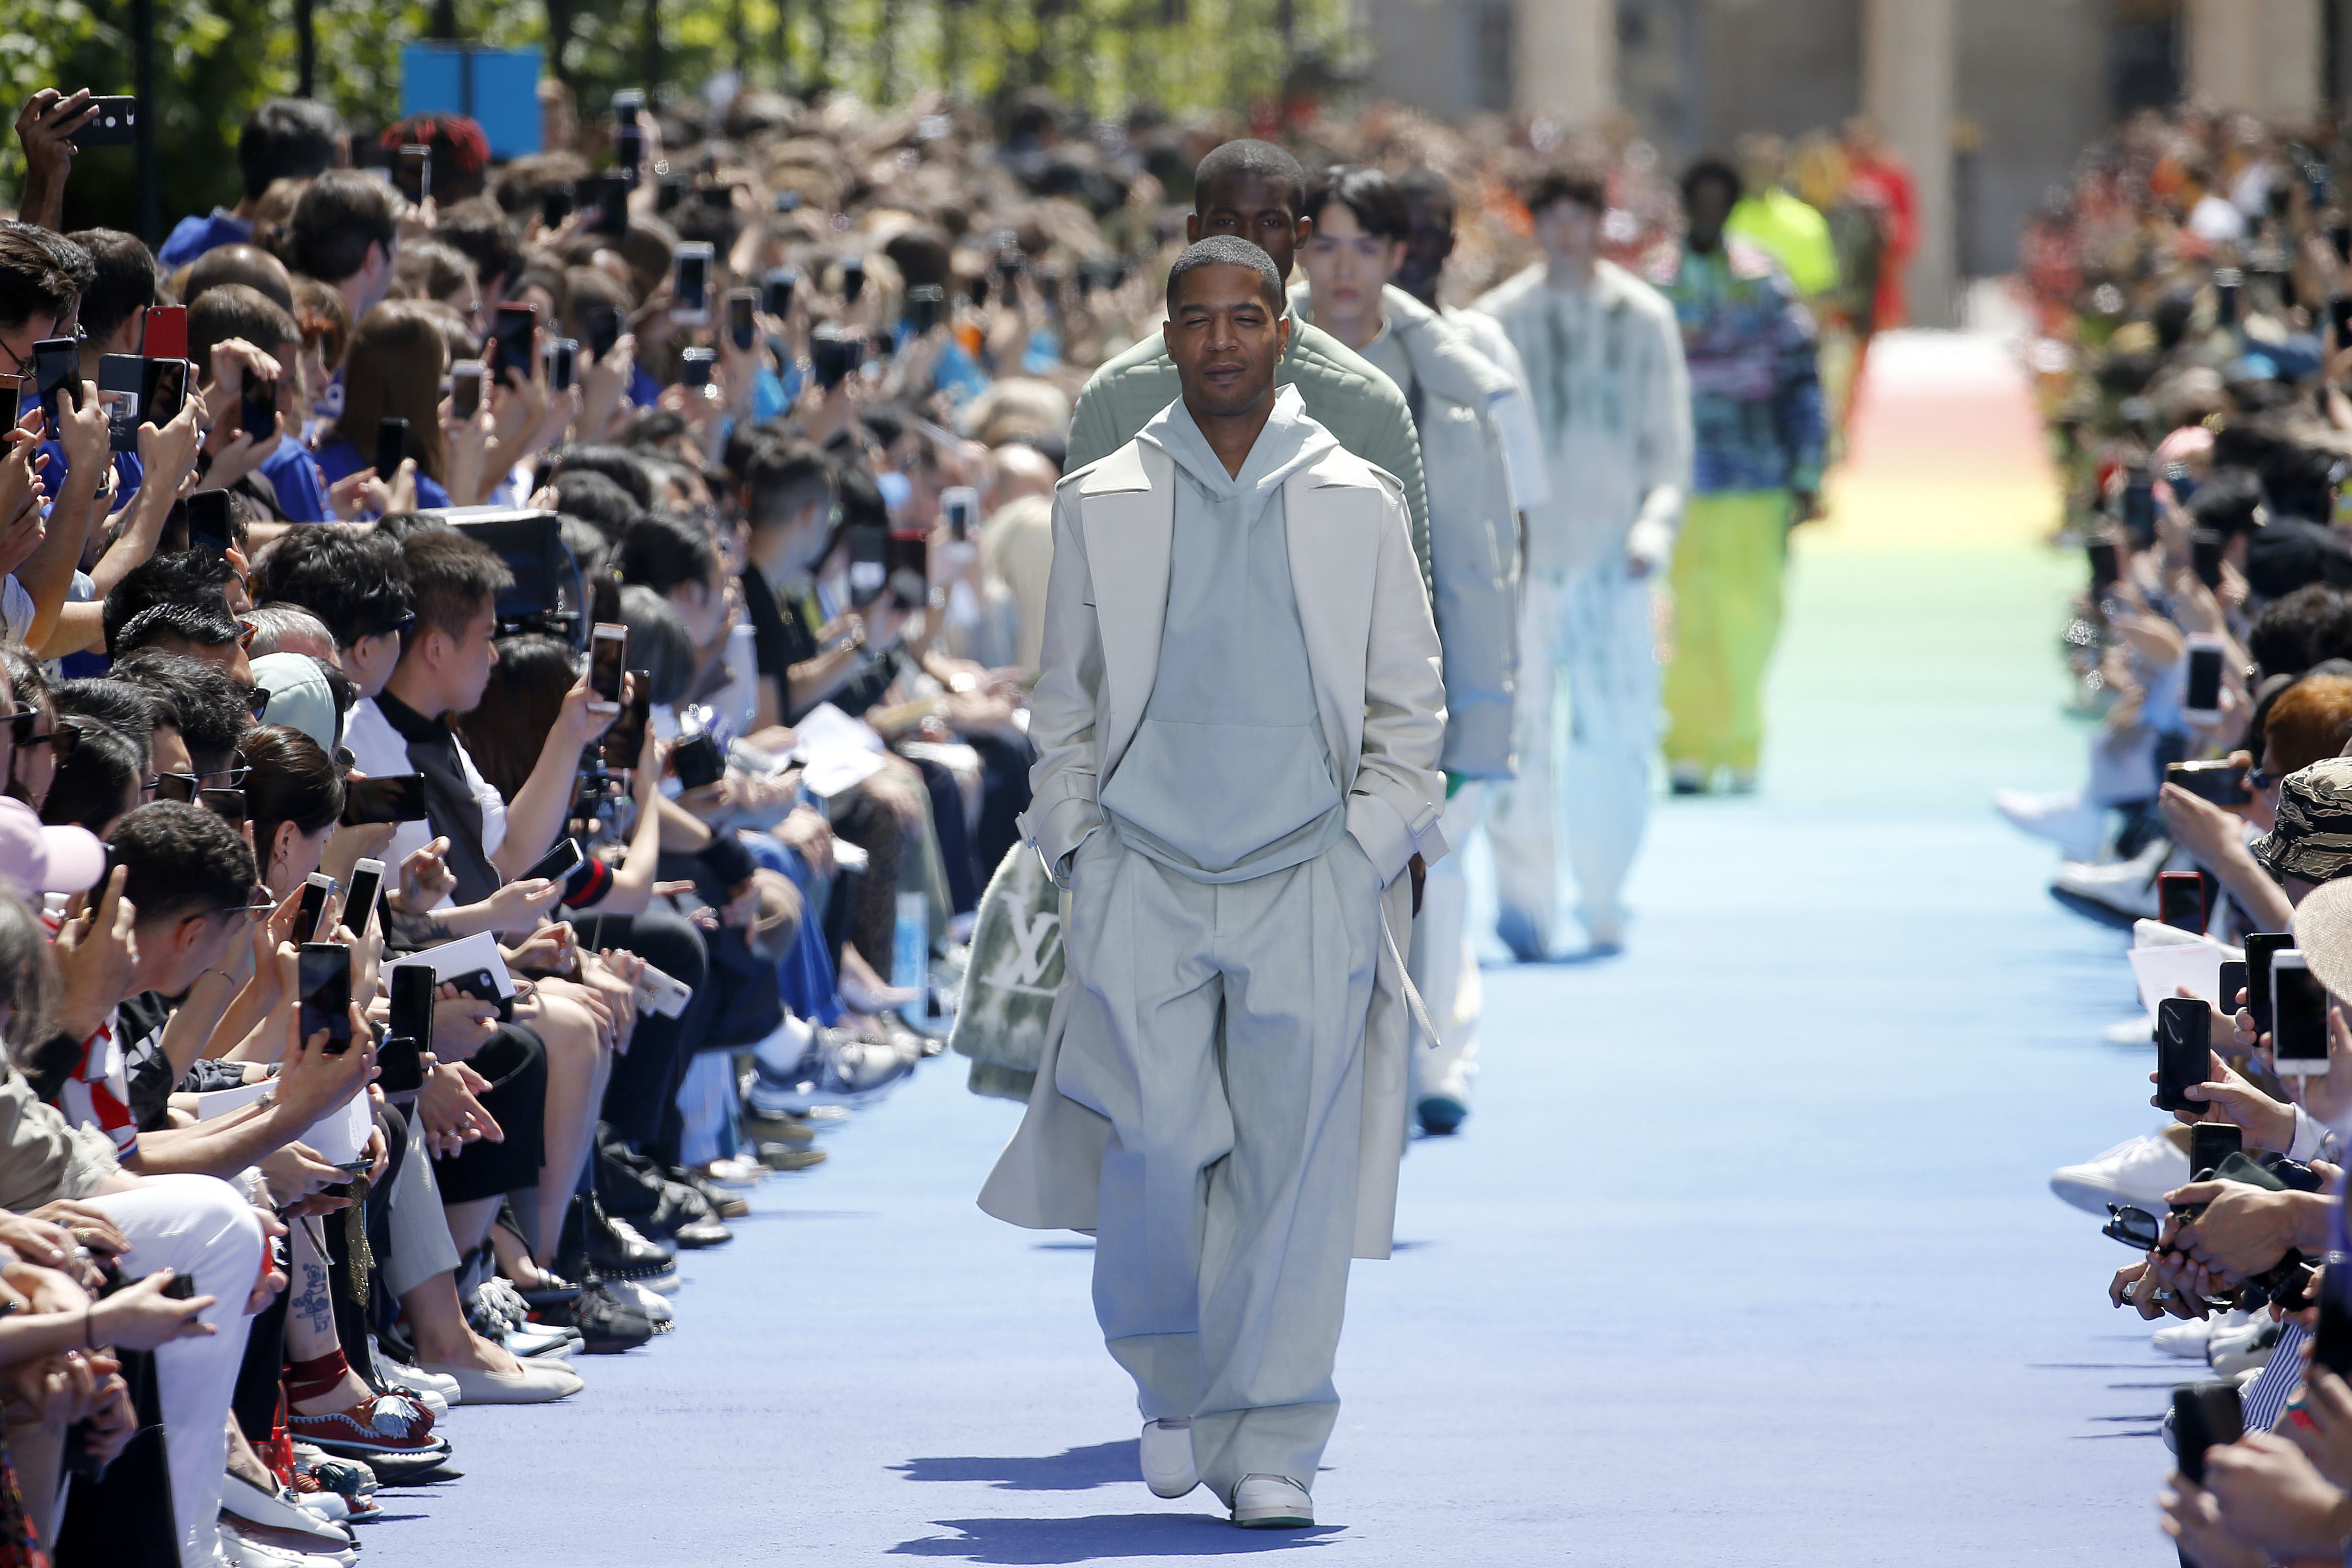 Louis Vuitton and Off-White show how streetwear drives innovation